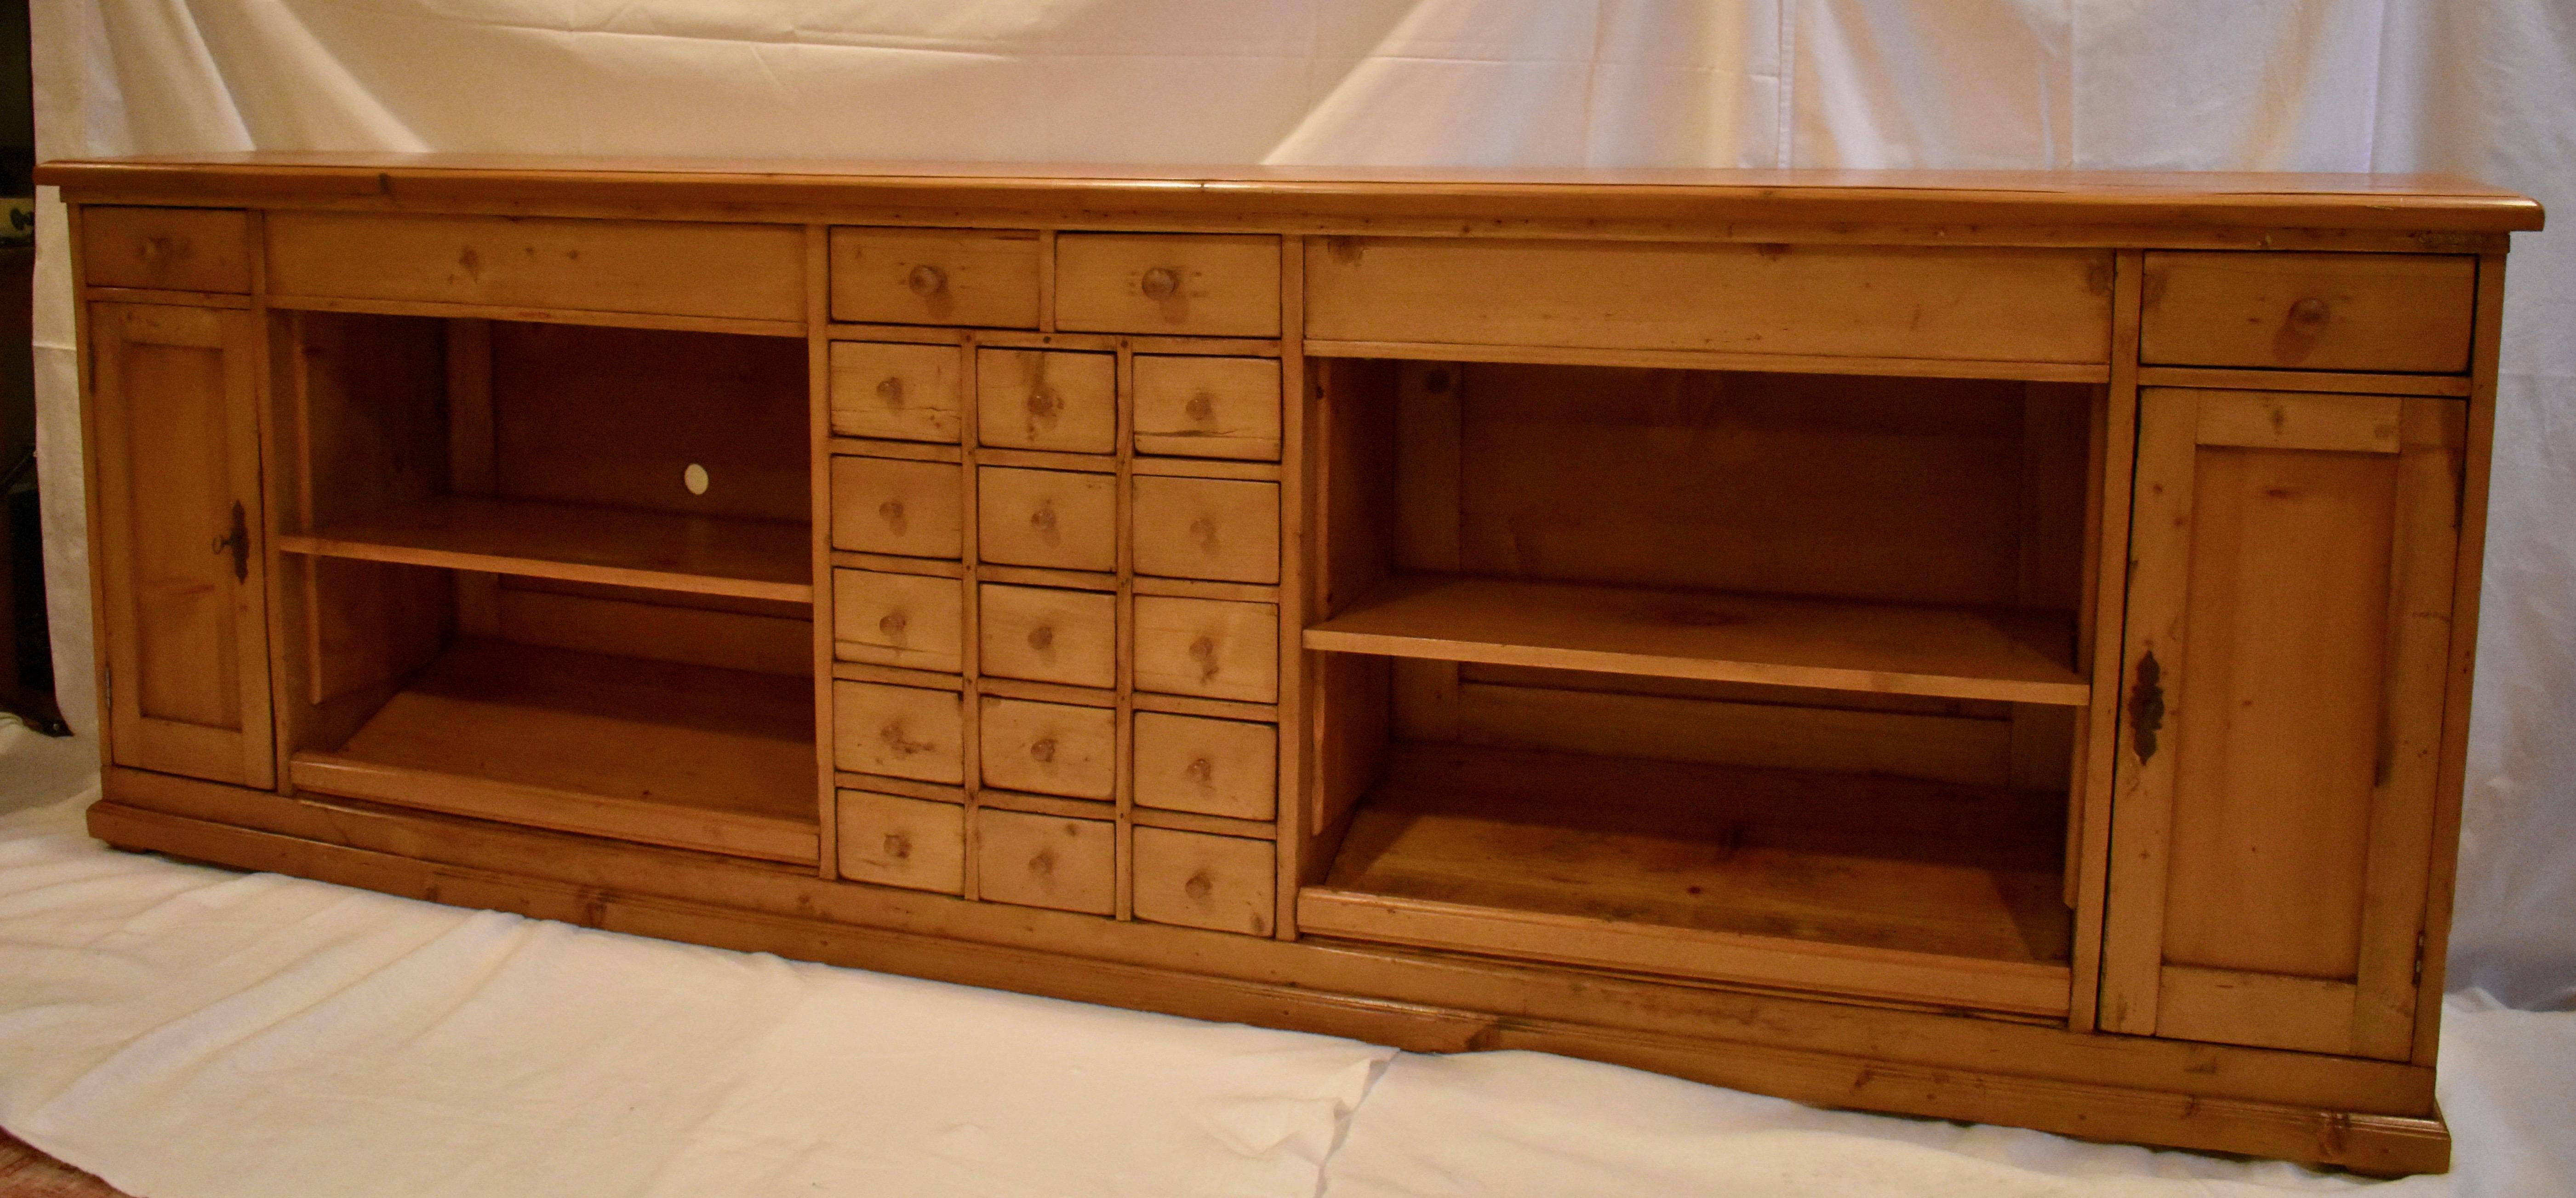 Hungarian Long Pine Sideboard with Nineteen Drawers